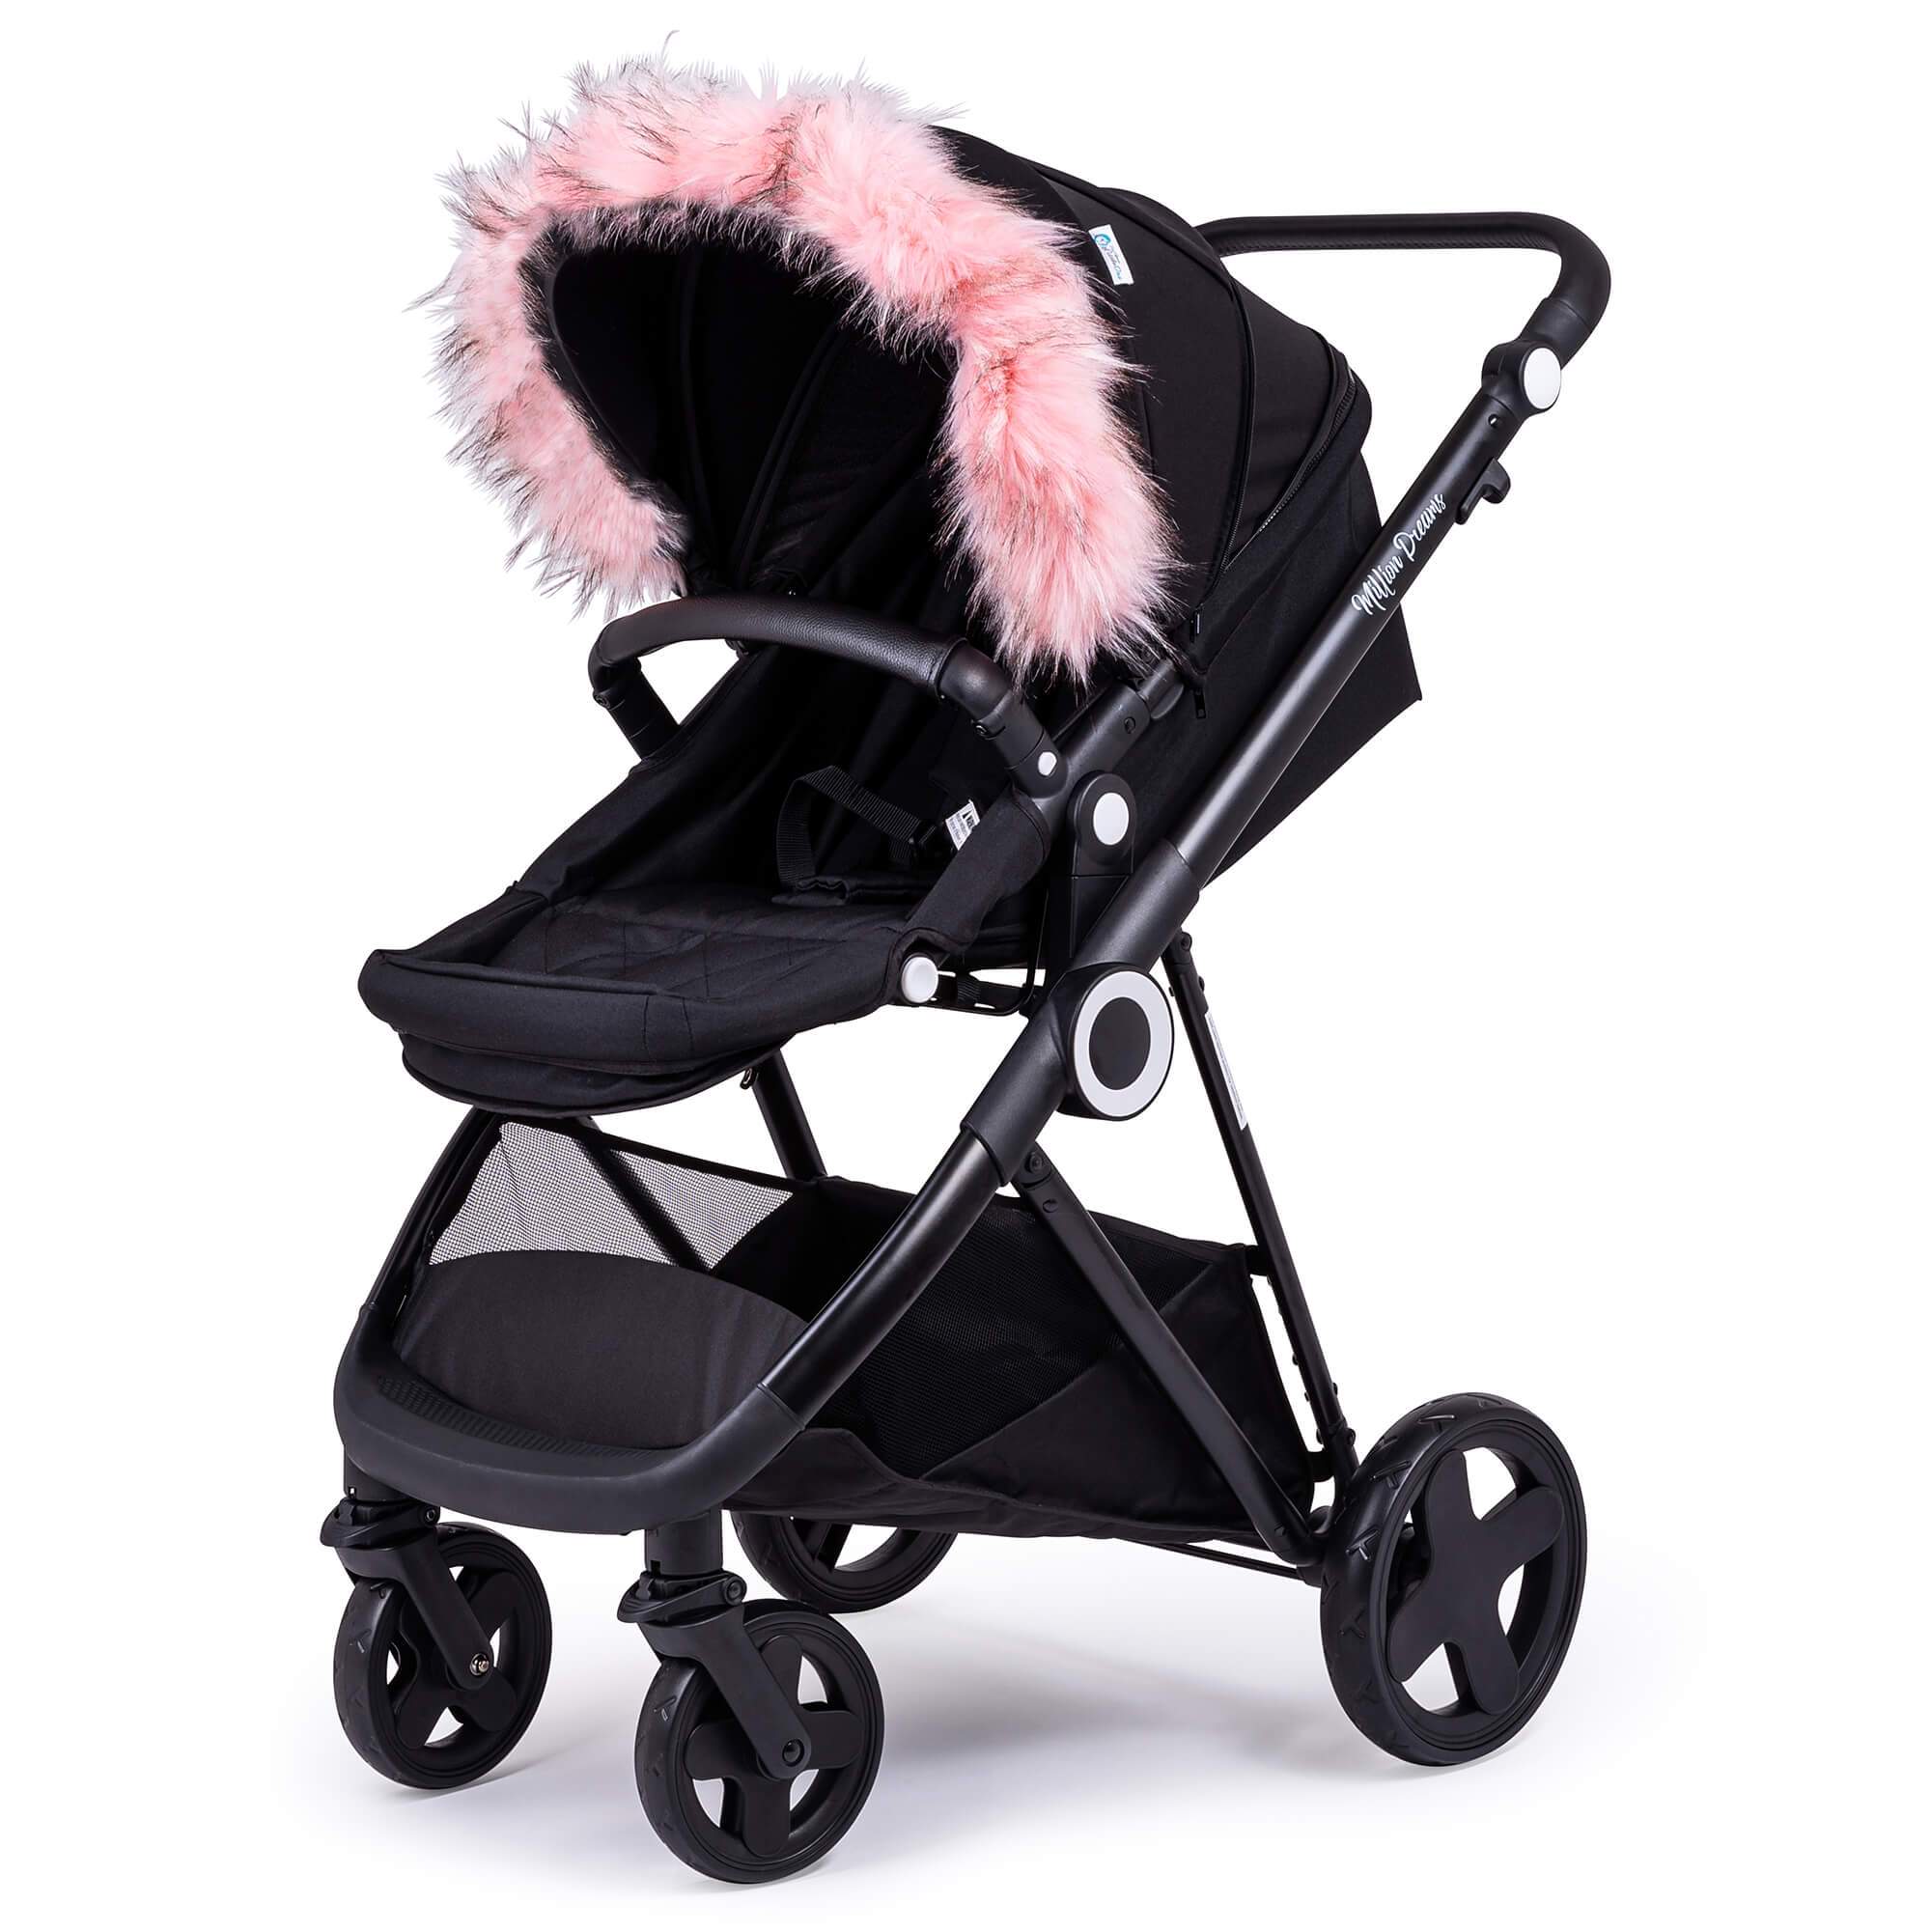 Pram Fur Hood Trim Attachment for Pushchair Compatible with Babylo - Light Pink / Fits All Models | For Your Little One